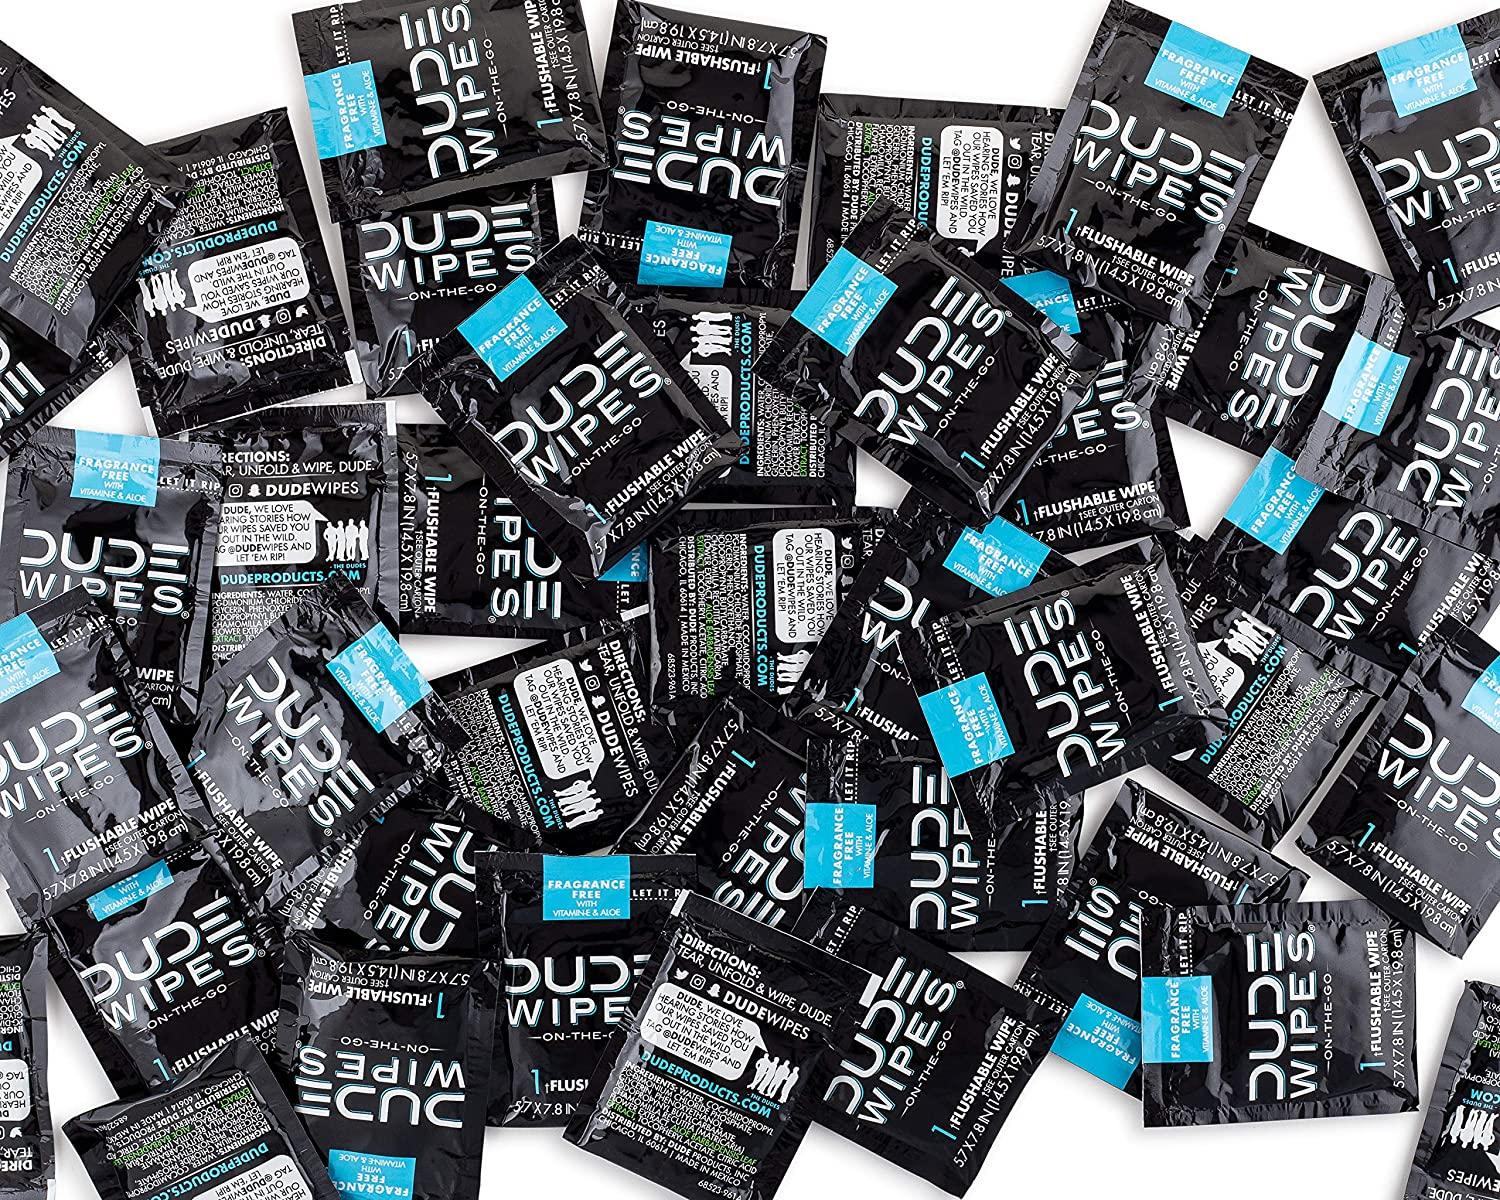 Dude Wipes Flushable Wipes, Fragrance Free, On-The-Go - 30 wipes